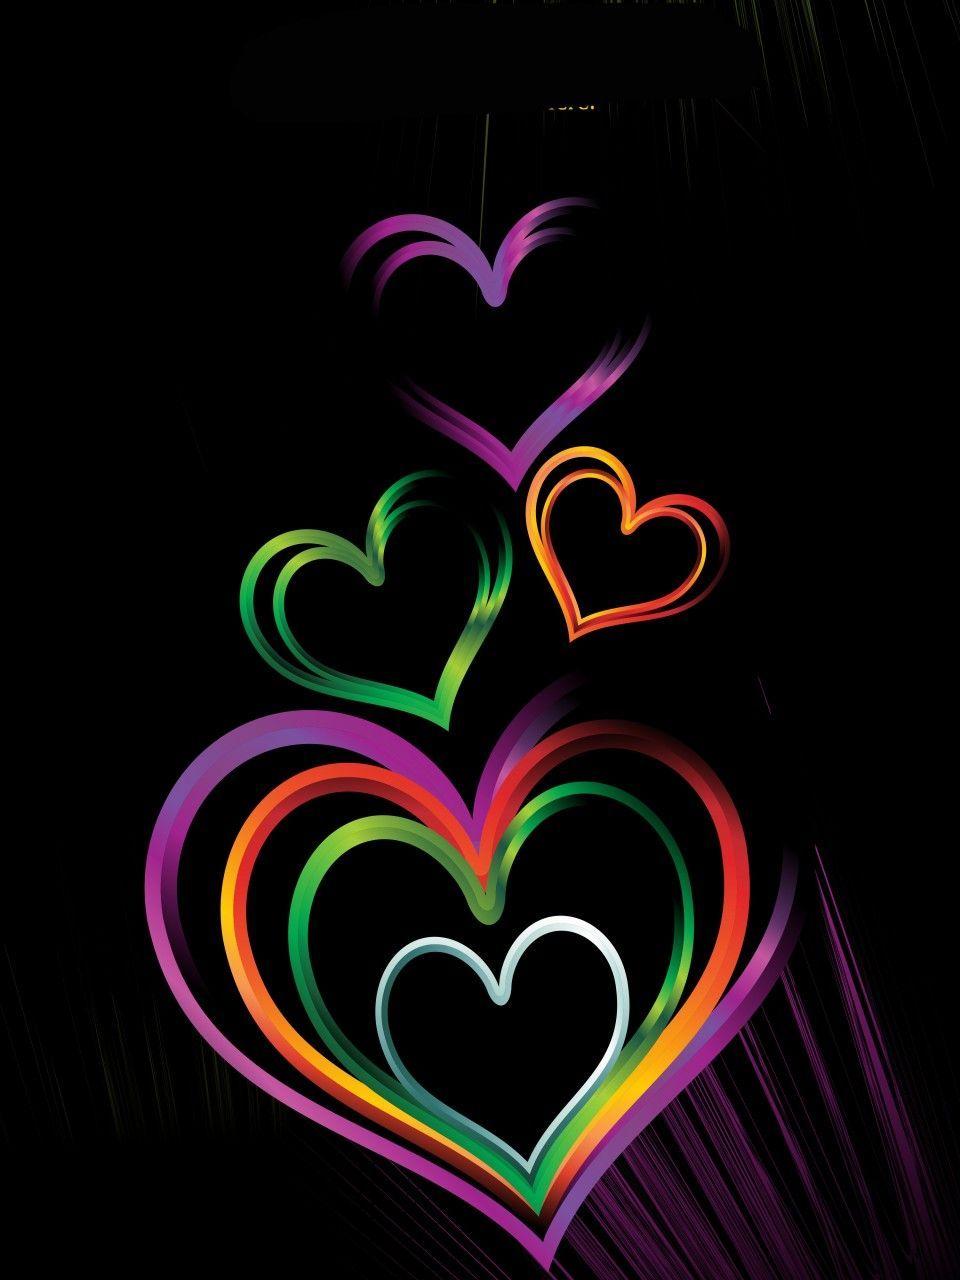 Colorful Heart Background. Colorful Heart on Black